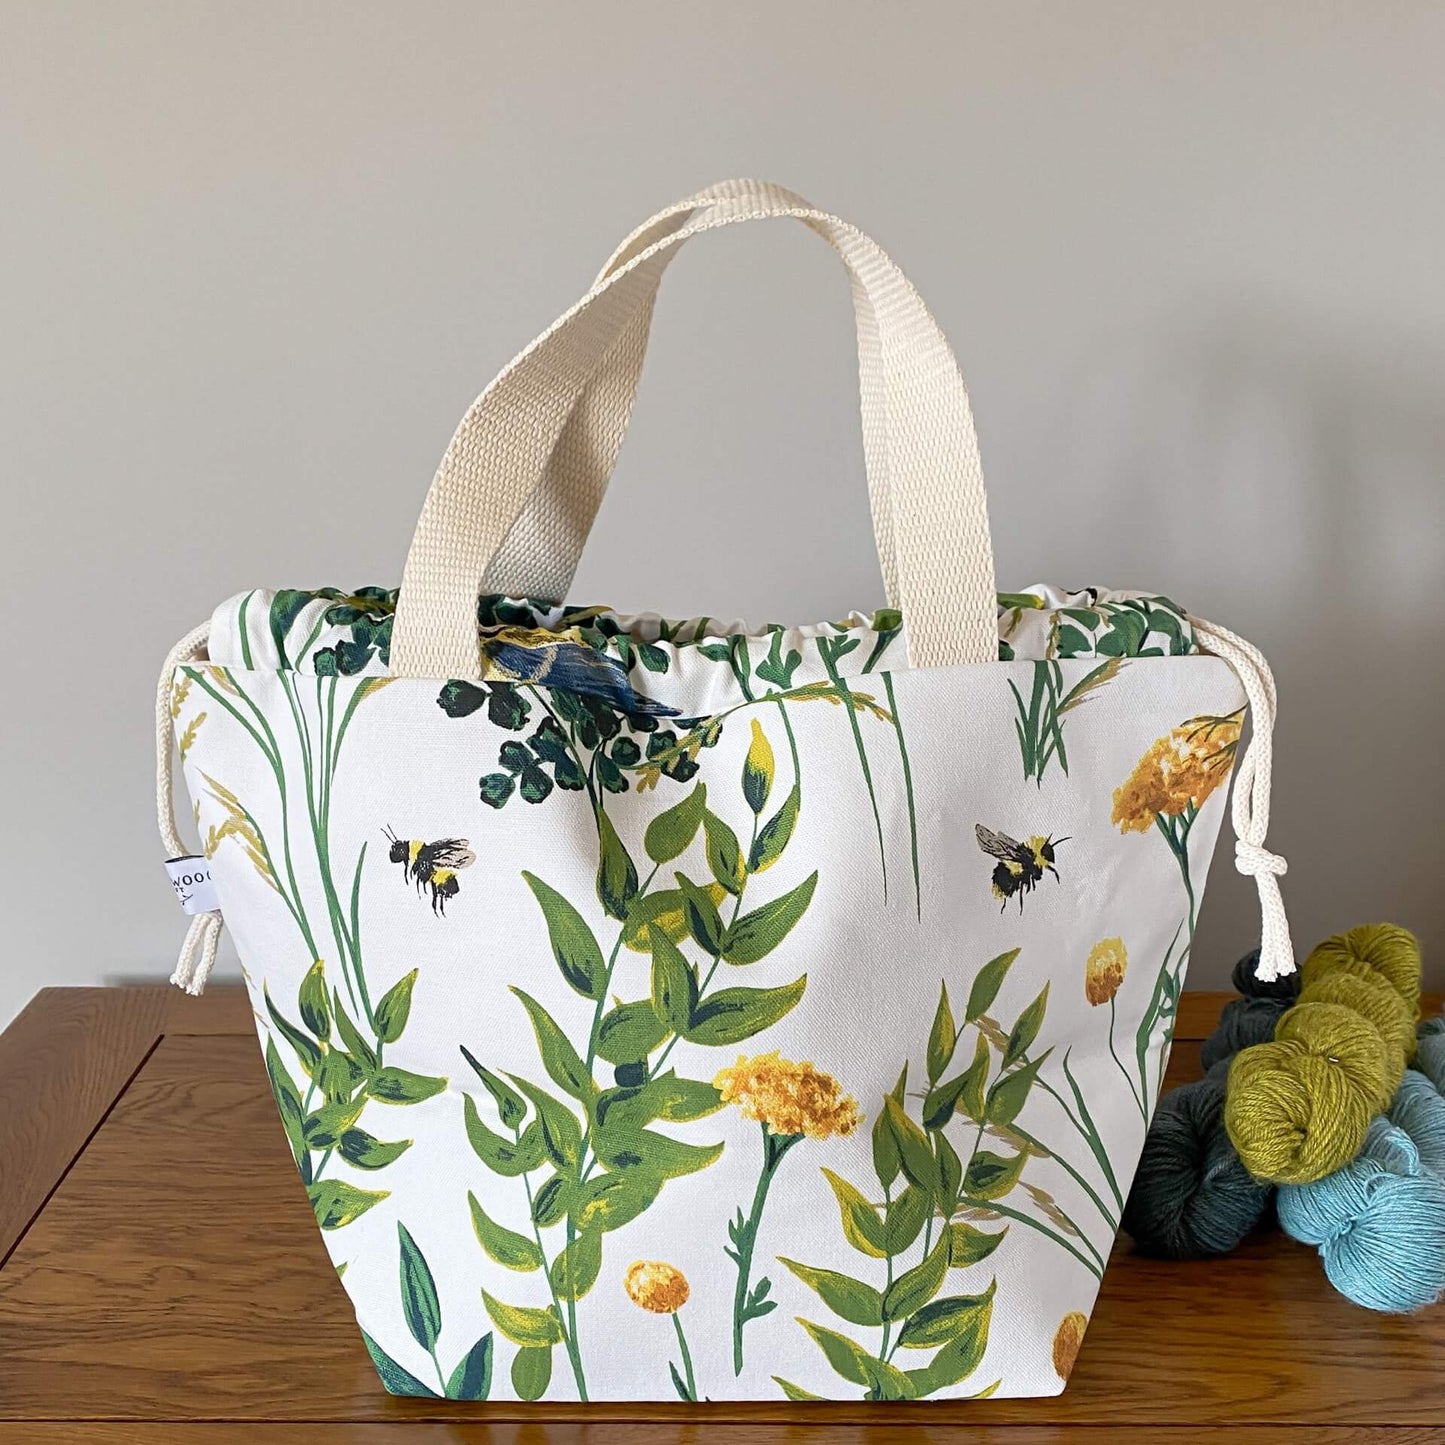 A large drawstring bag sits on a wooden table with its handles pulled up. The bag is next to three skeins of yarn. Printed on the bag is a summery nature scene with orange foliage and bees. 